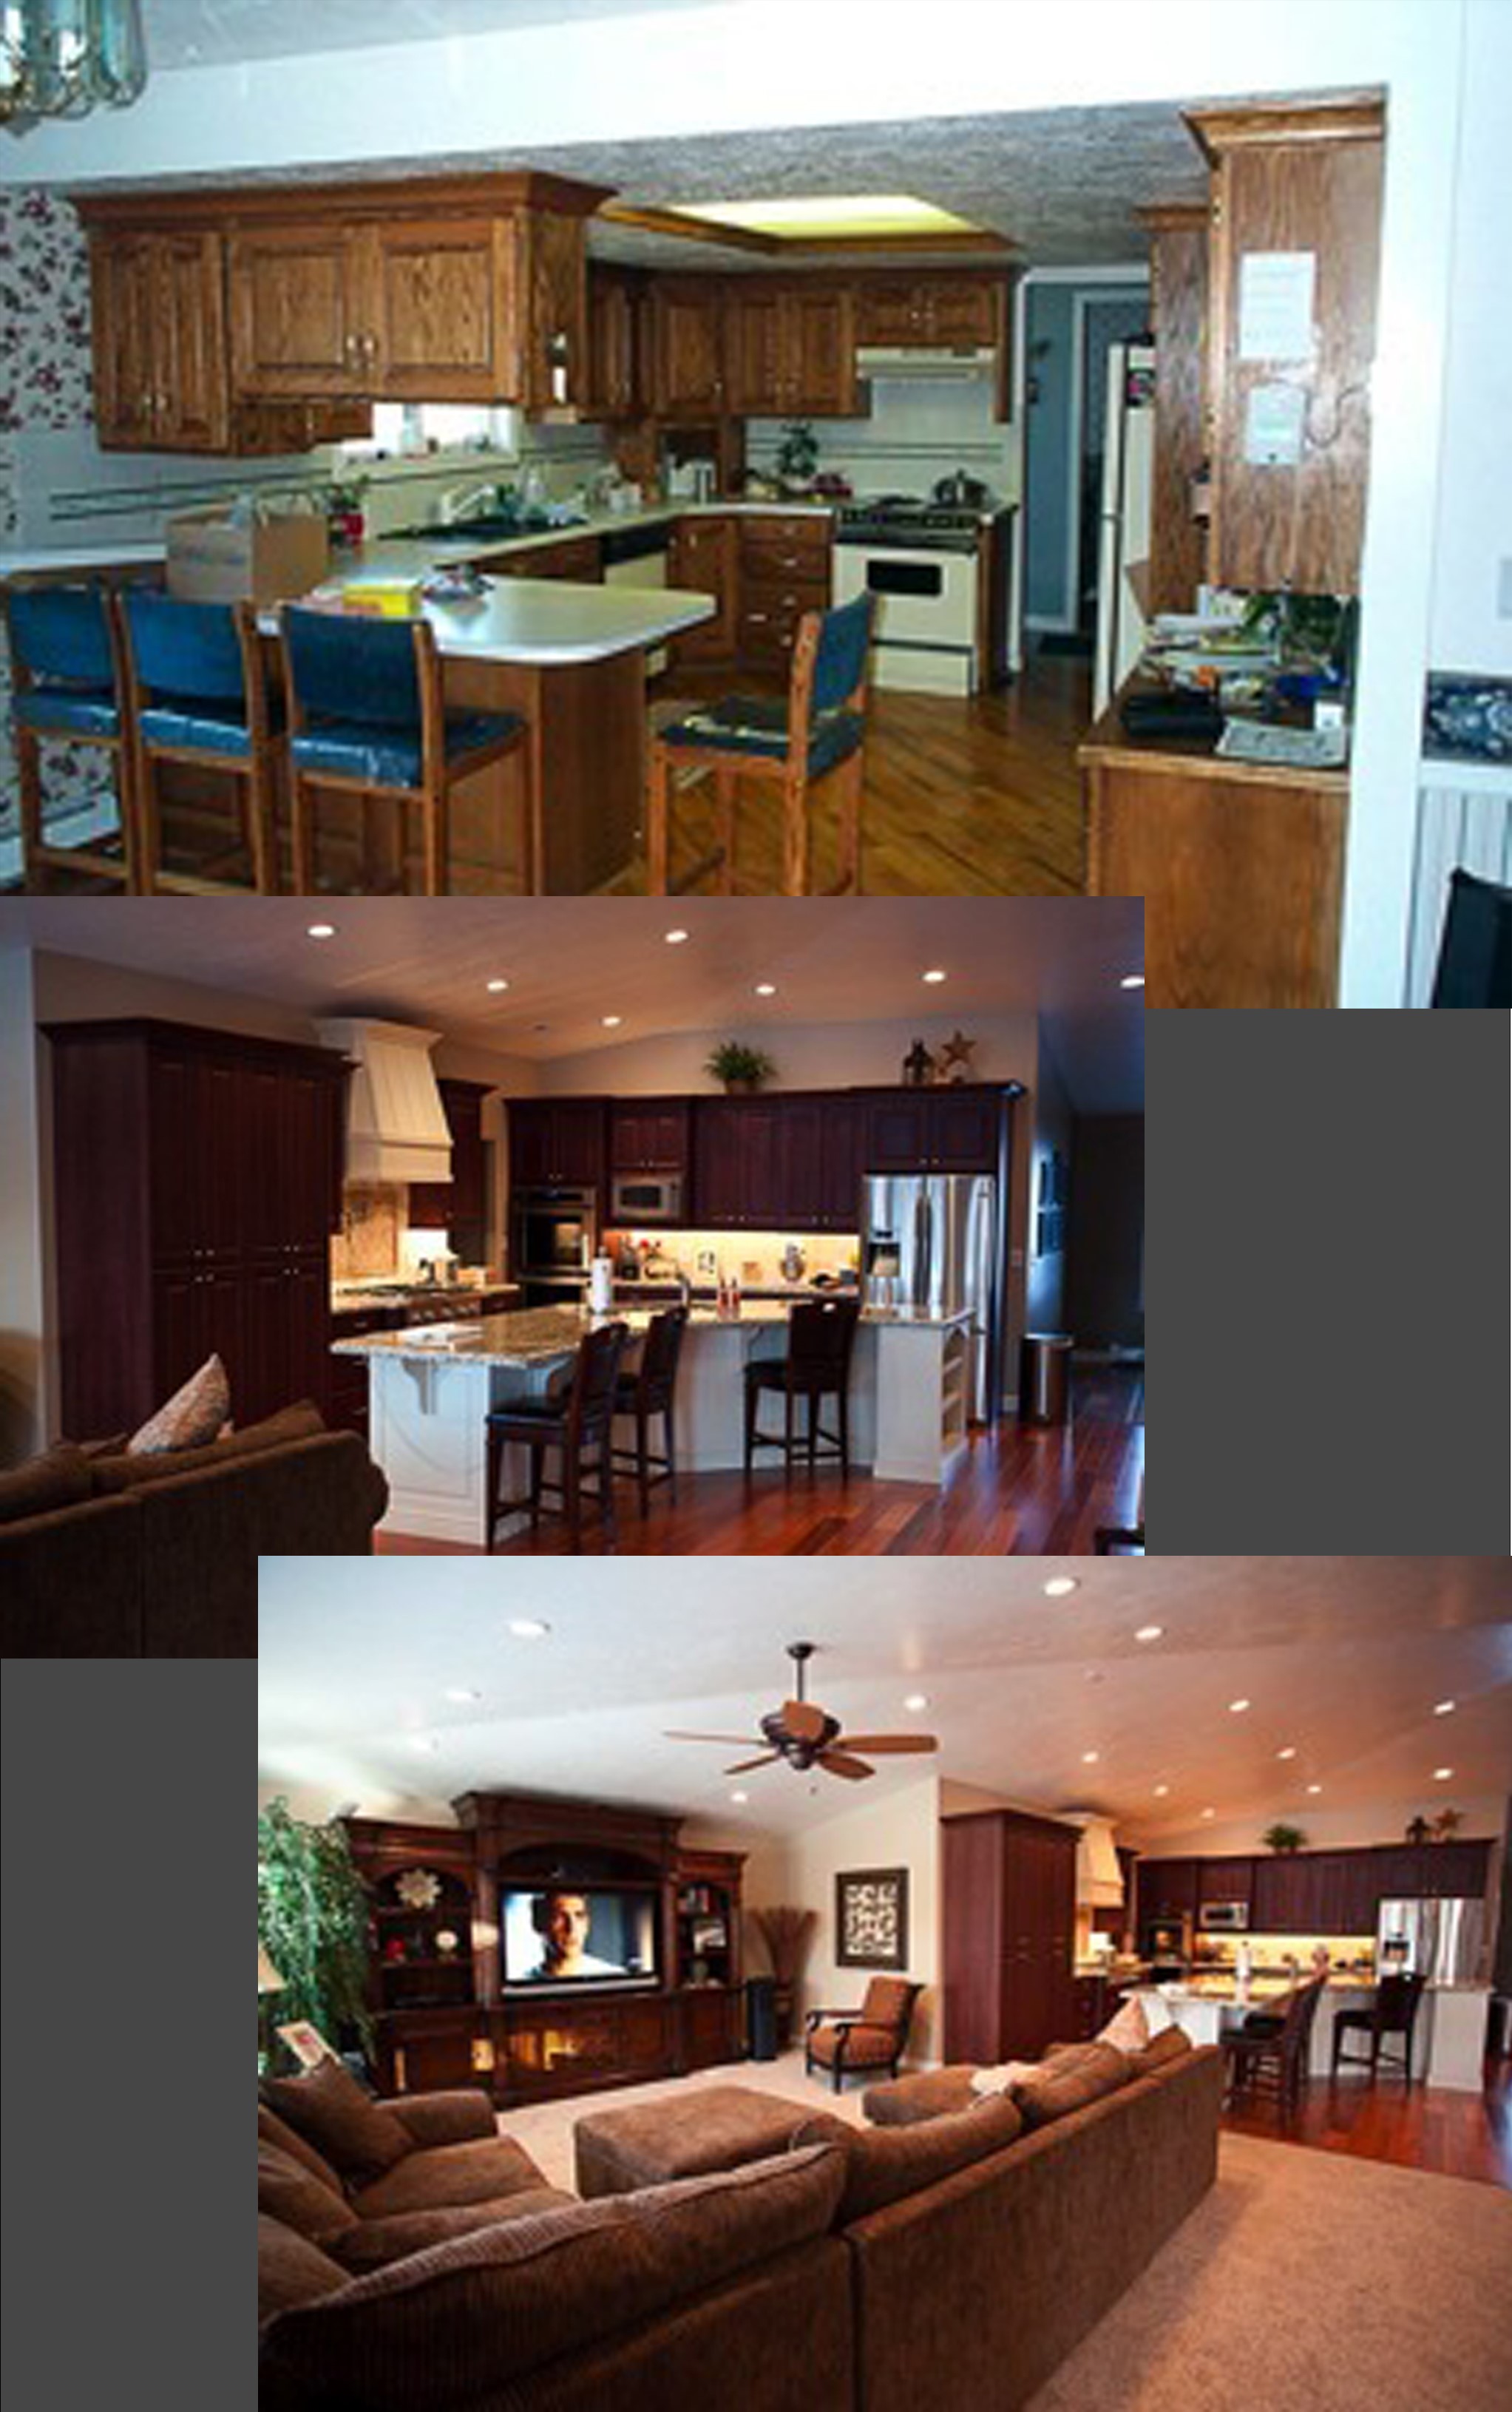 Before & After Remodel